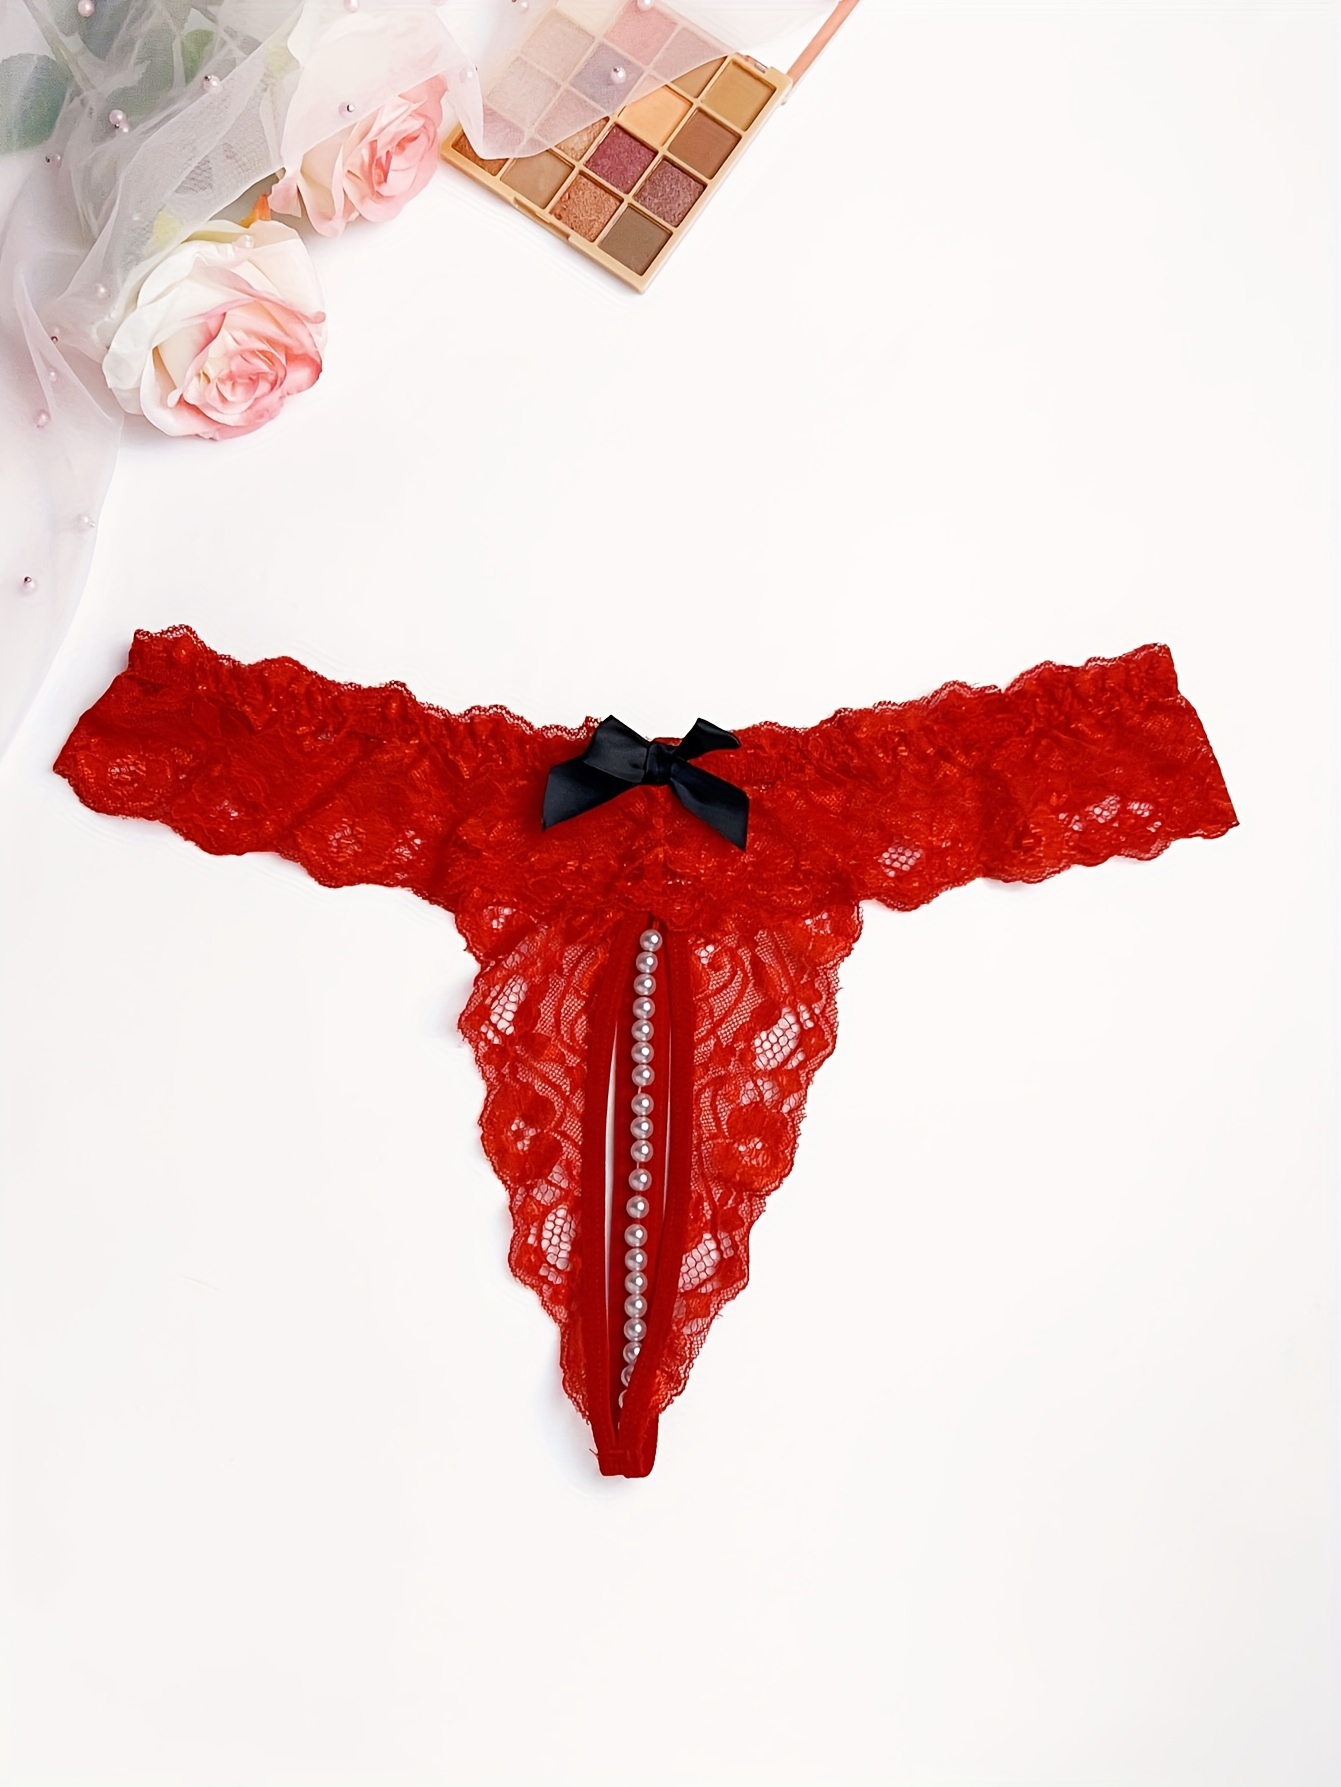 Lace Thongs with Bead Accent